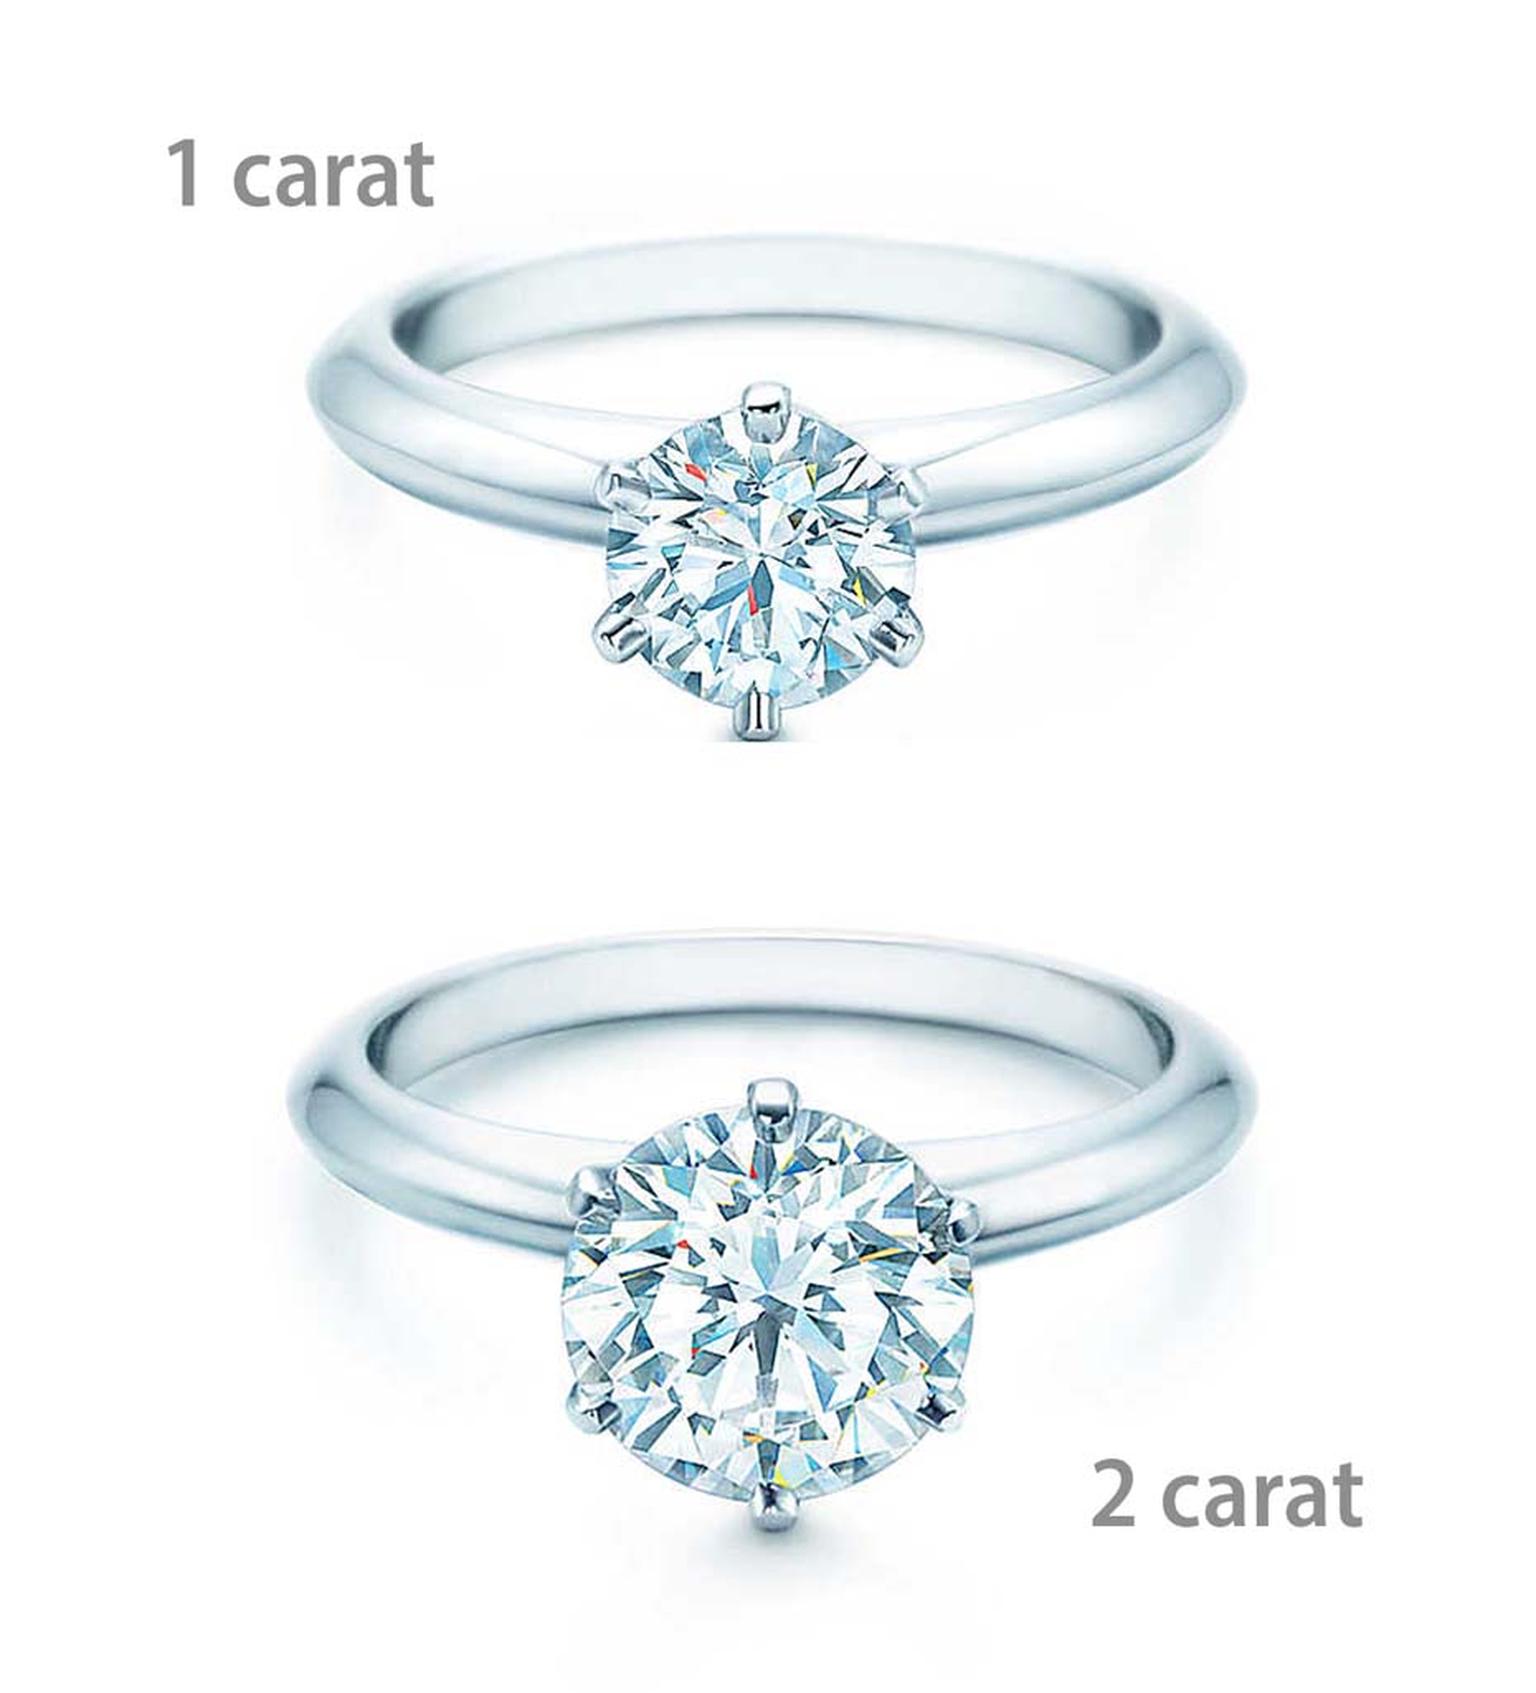 1ct or 2ct_Tiffany and Co diamond rings.jpg